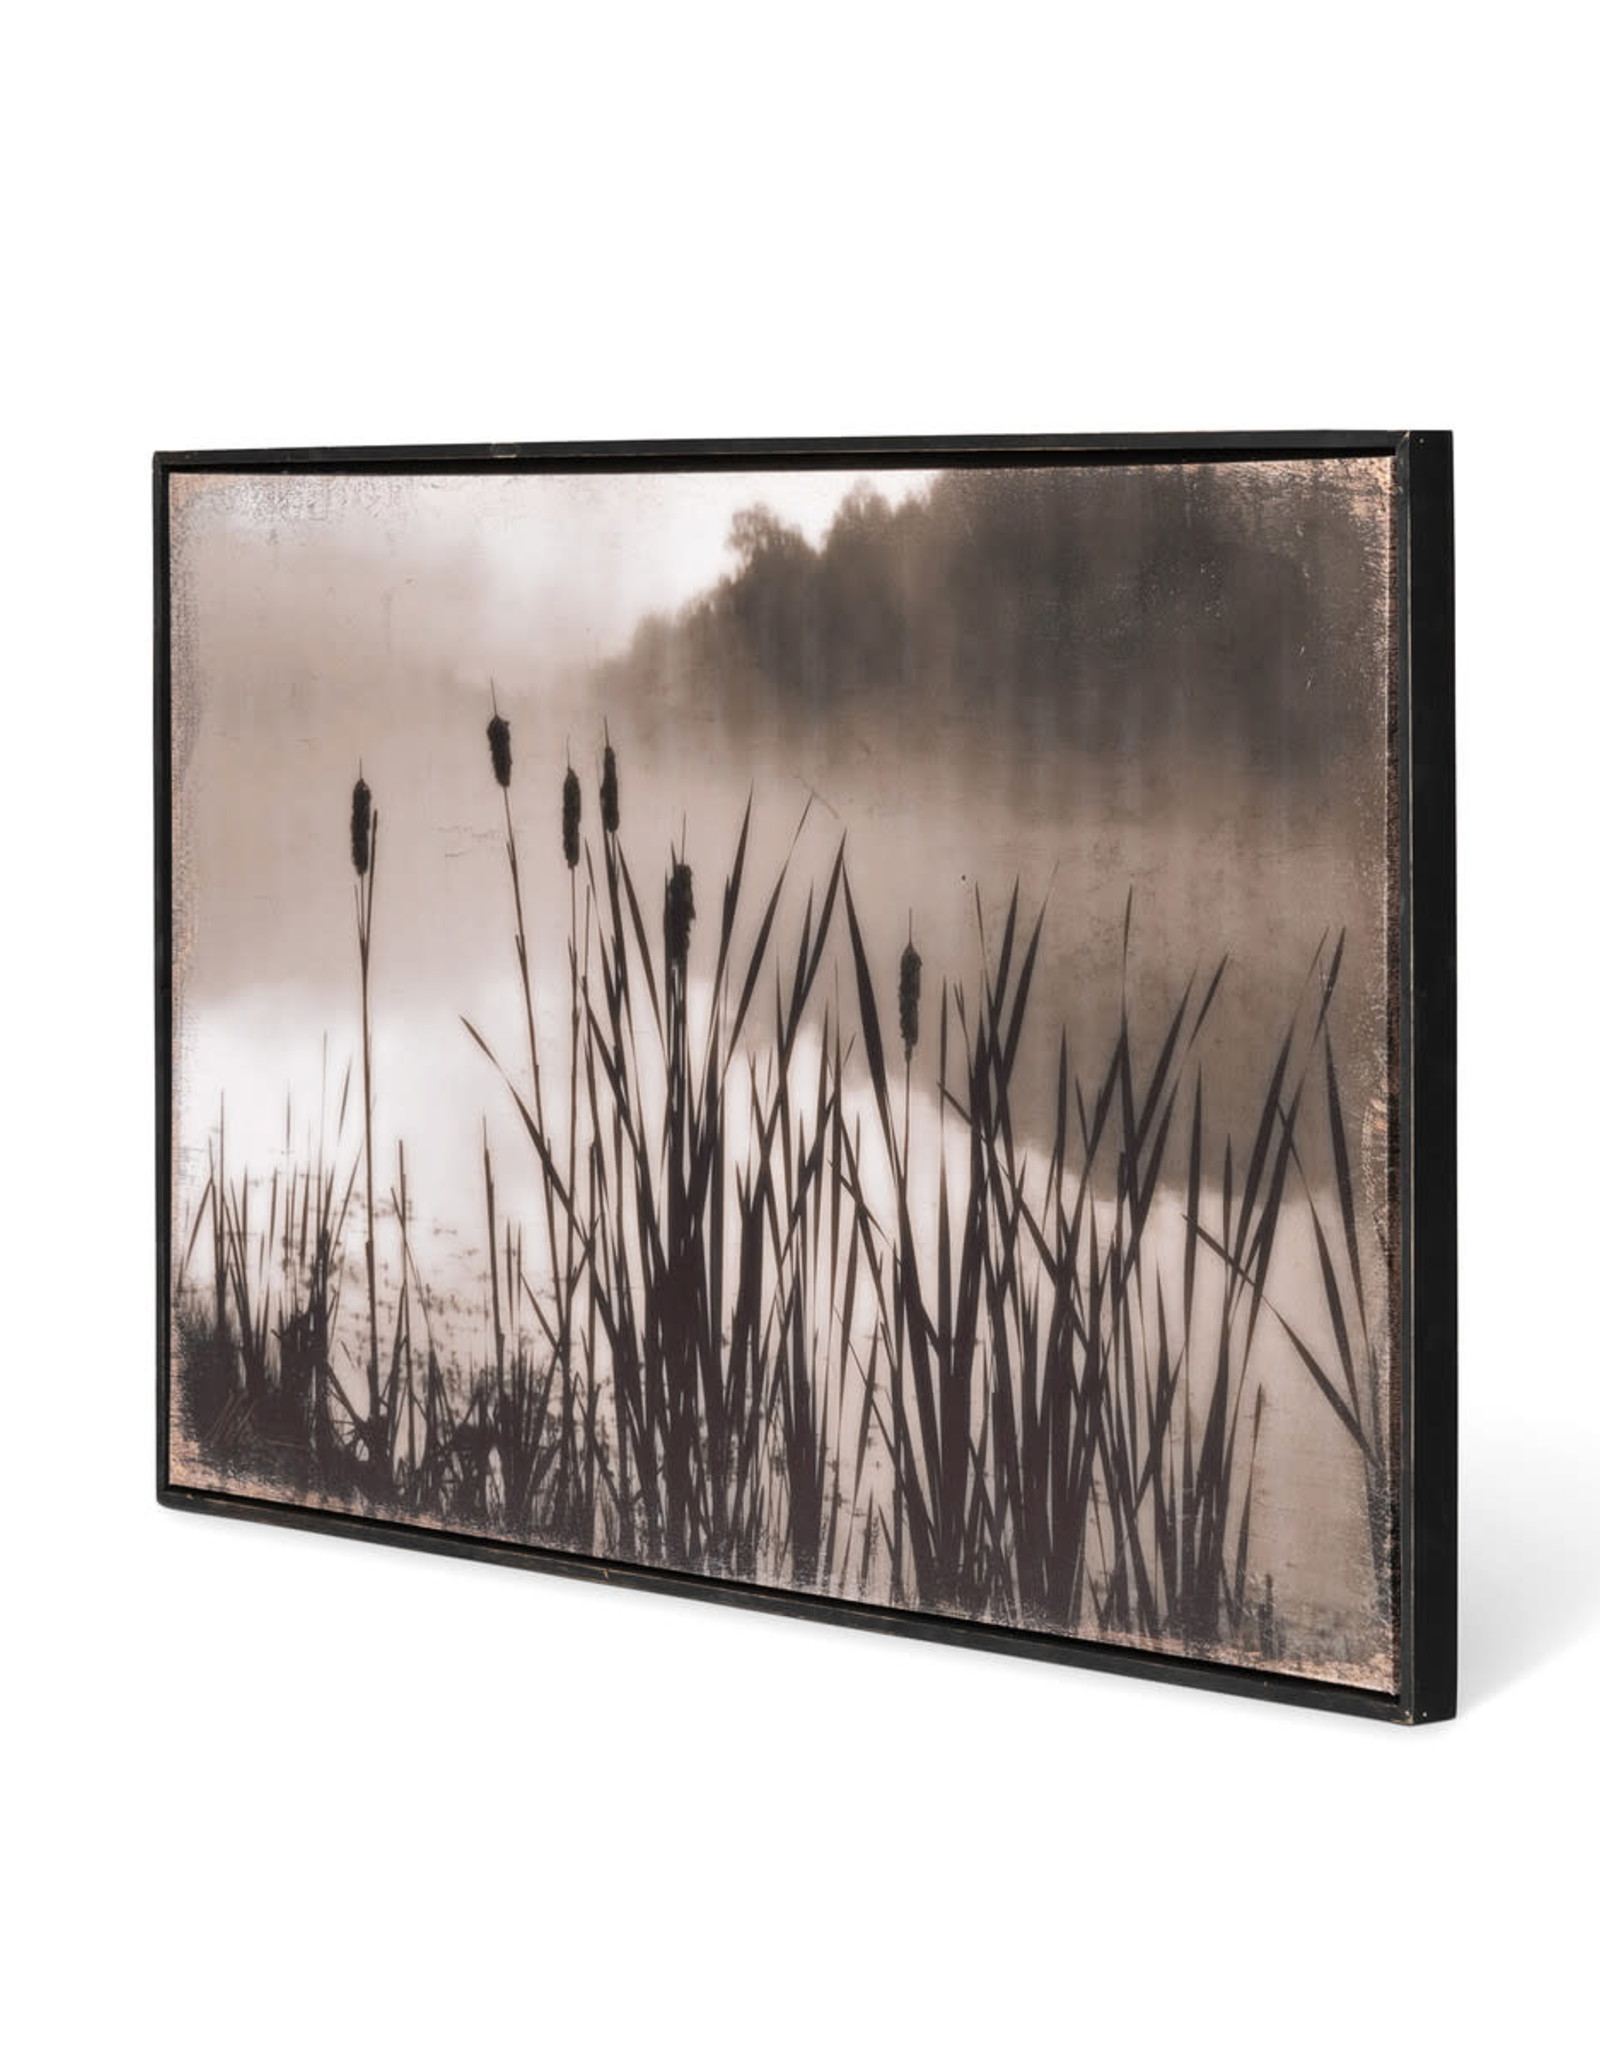 Park Hill Collection Framed Cattail Print 36.5"L x 1.25"W x 22.75"H